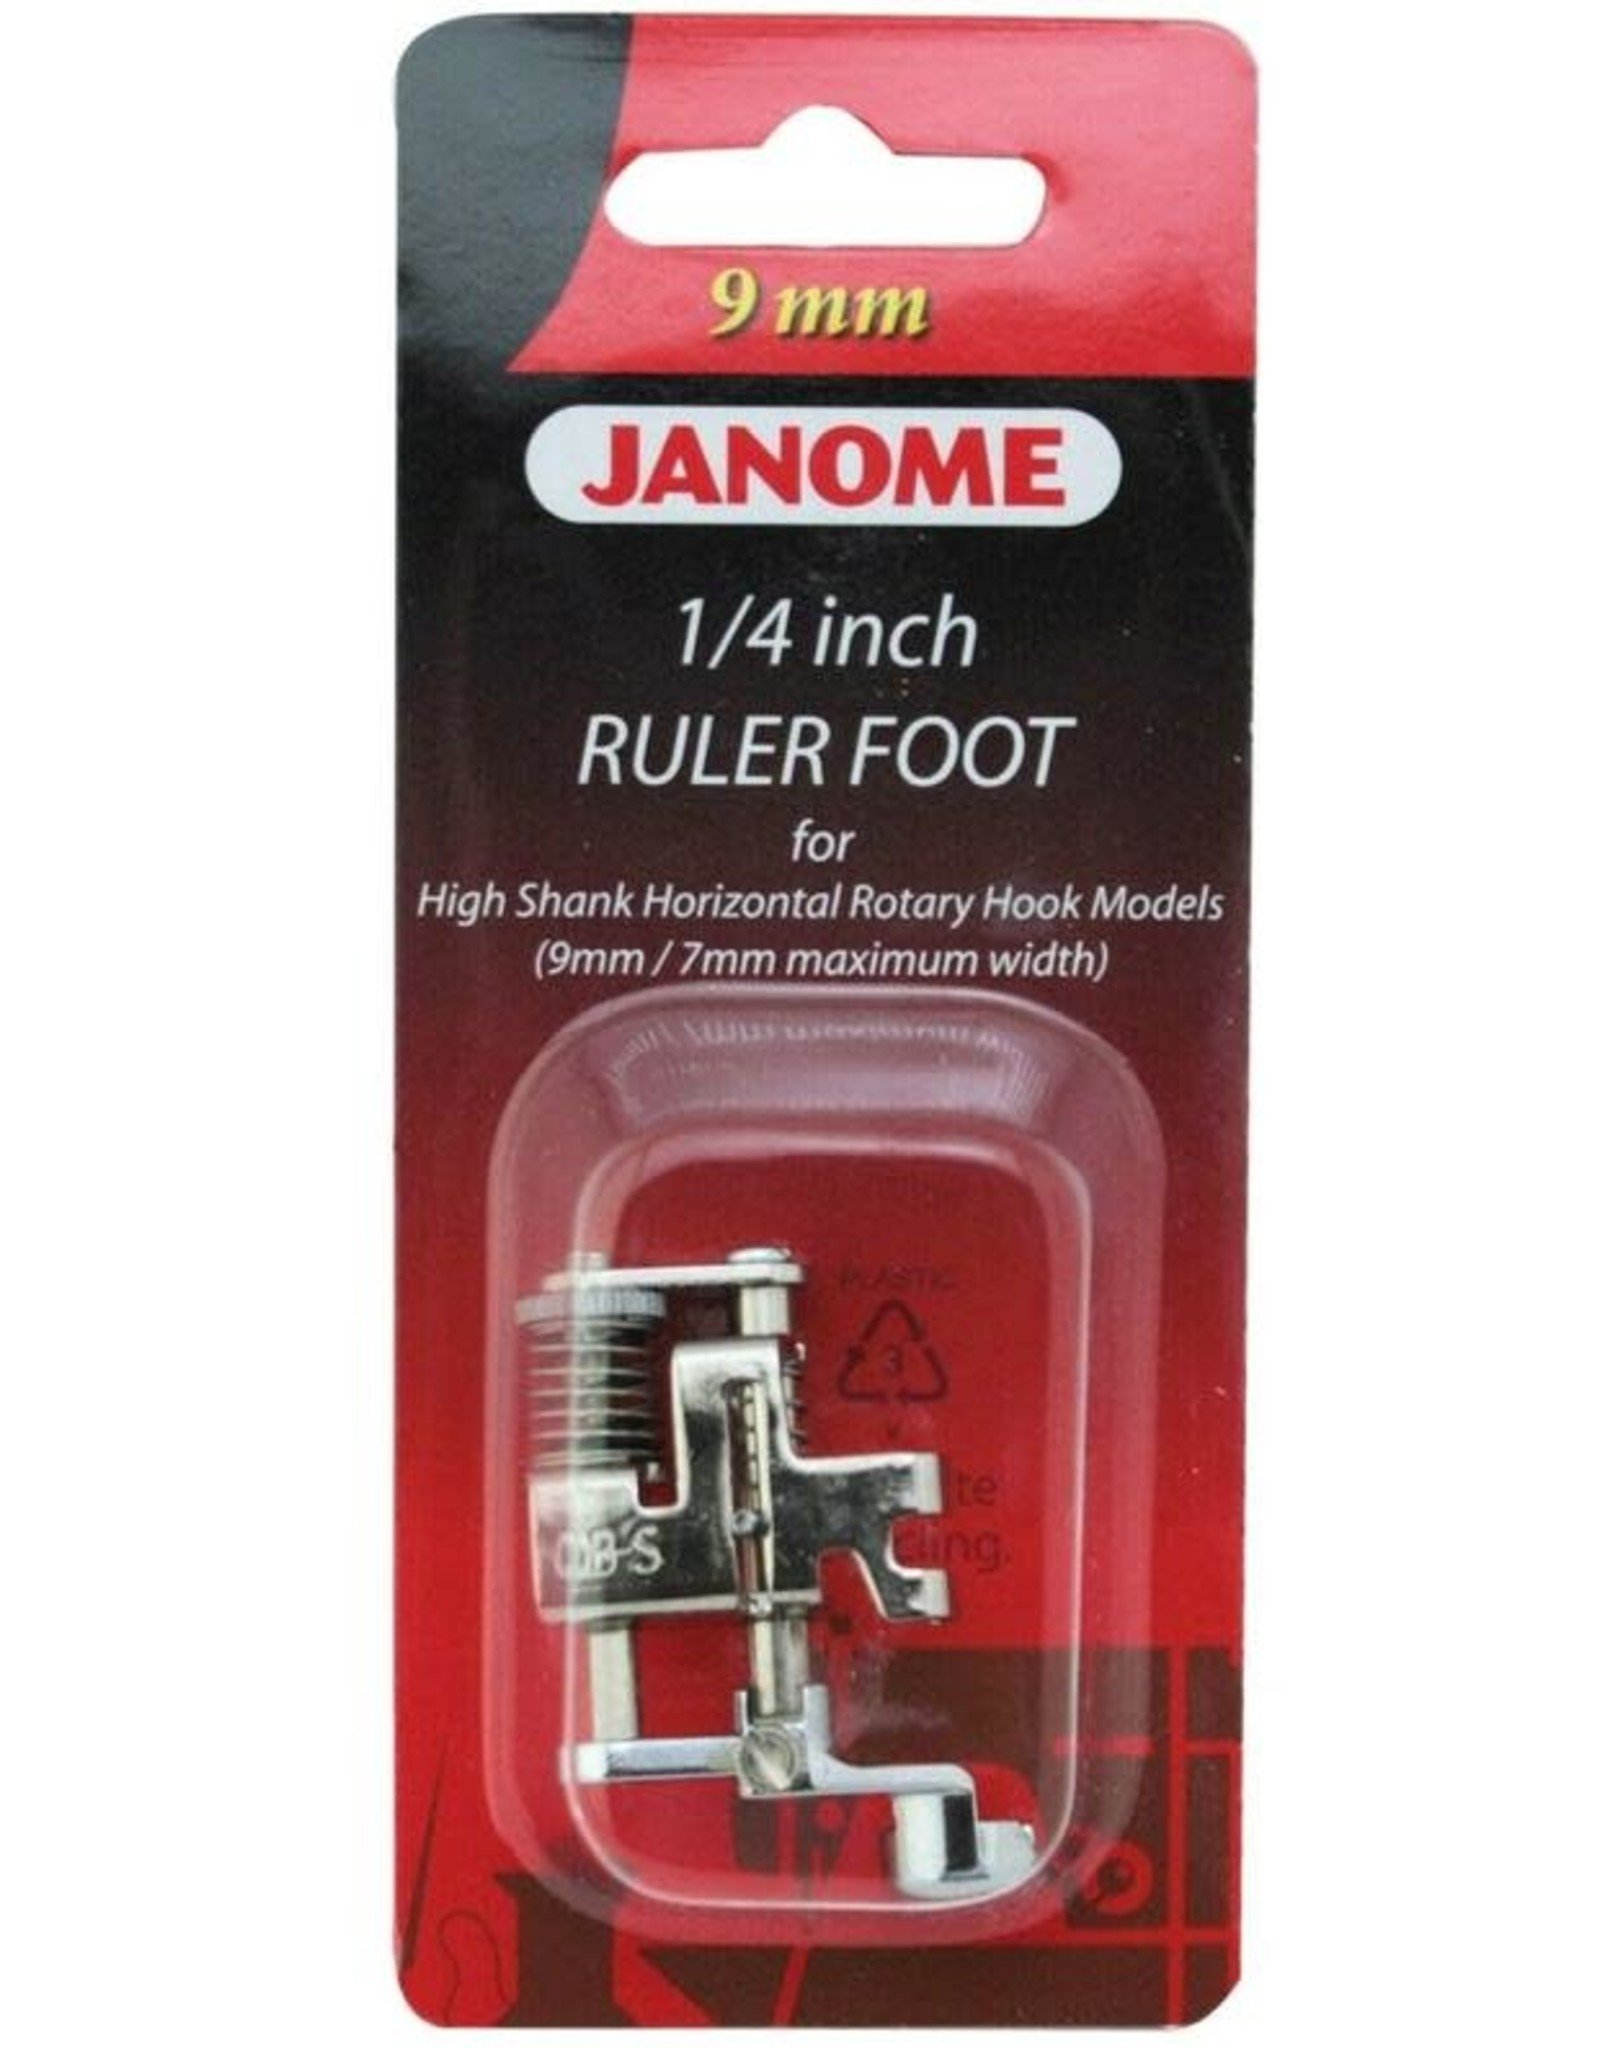 Janome High shank 1/4" ruler foot (9mm)- 202441009